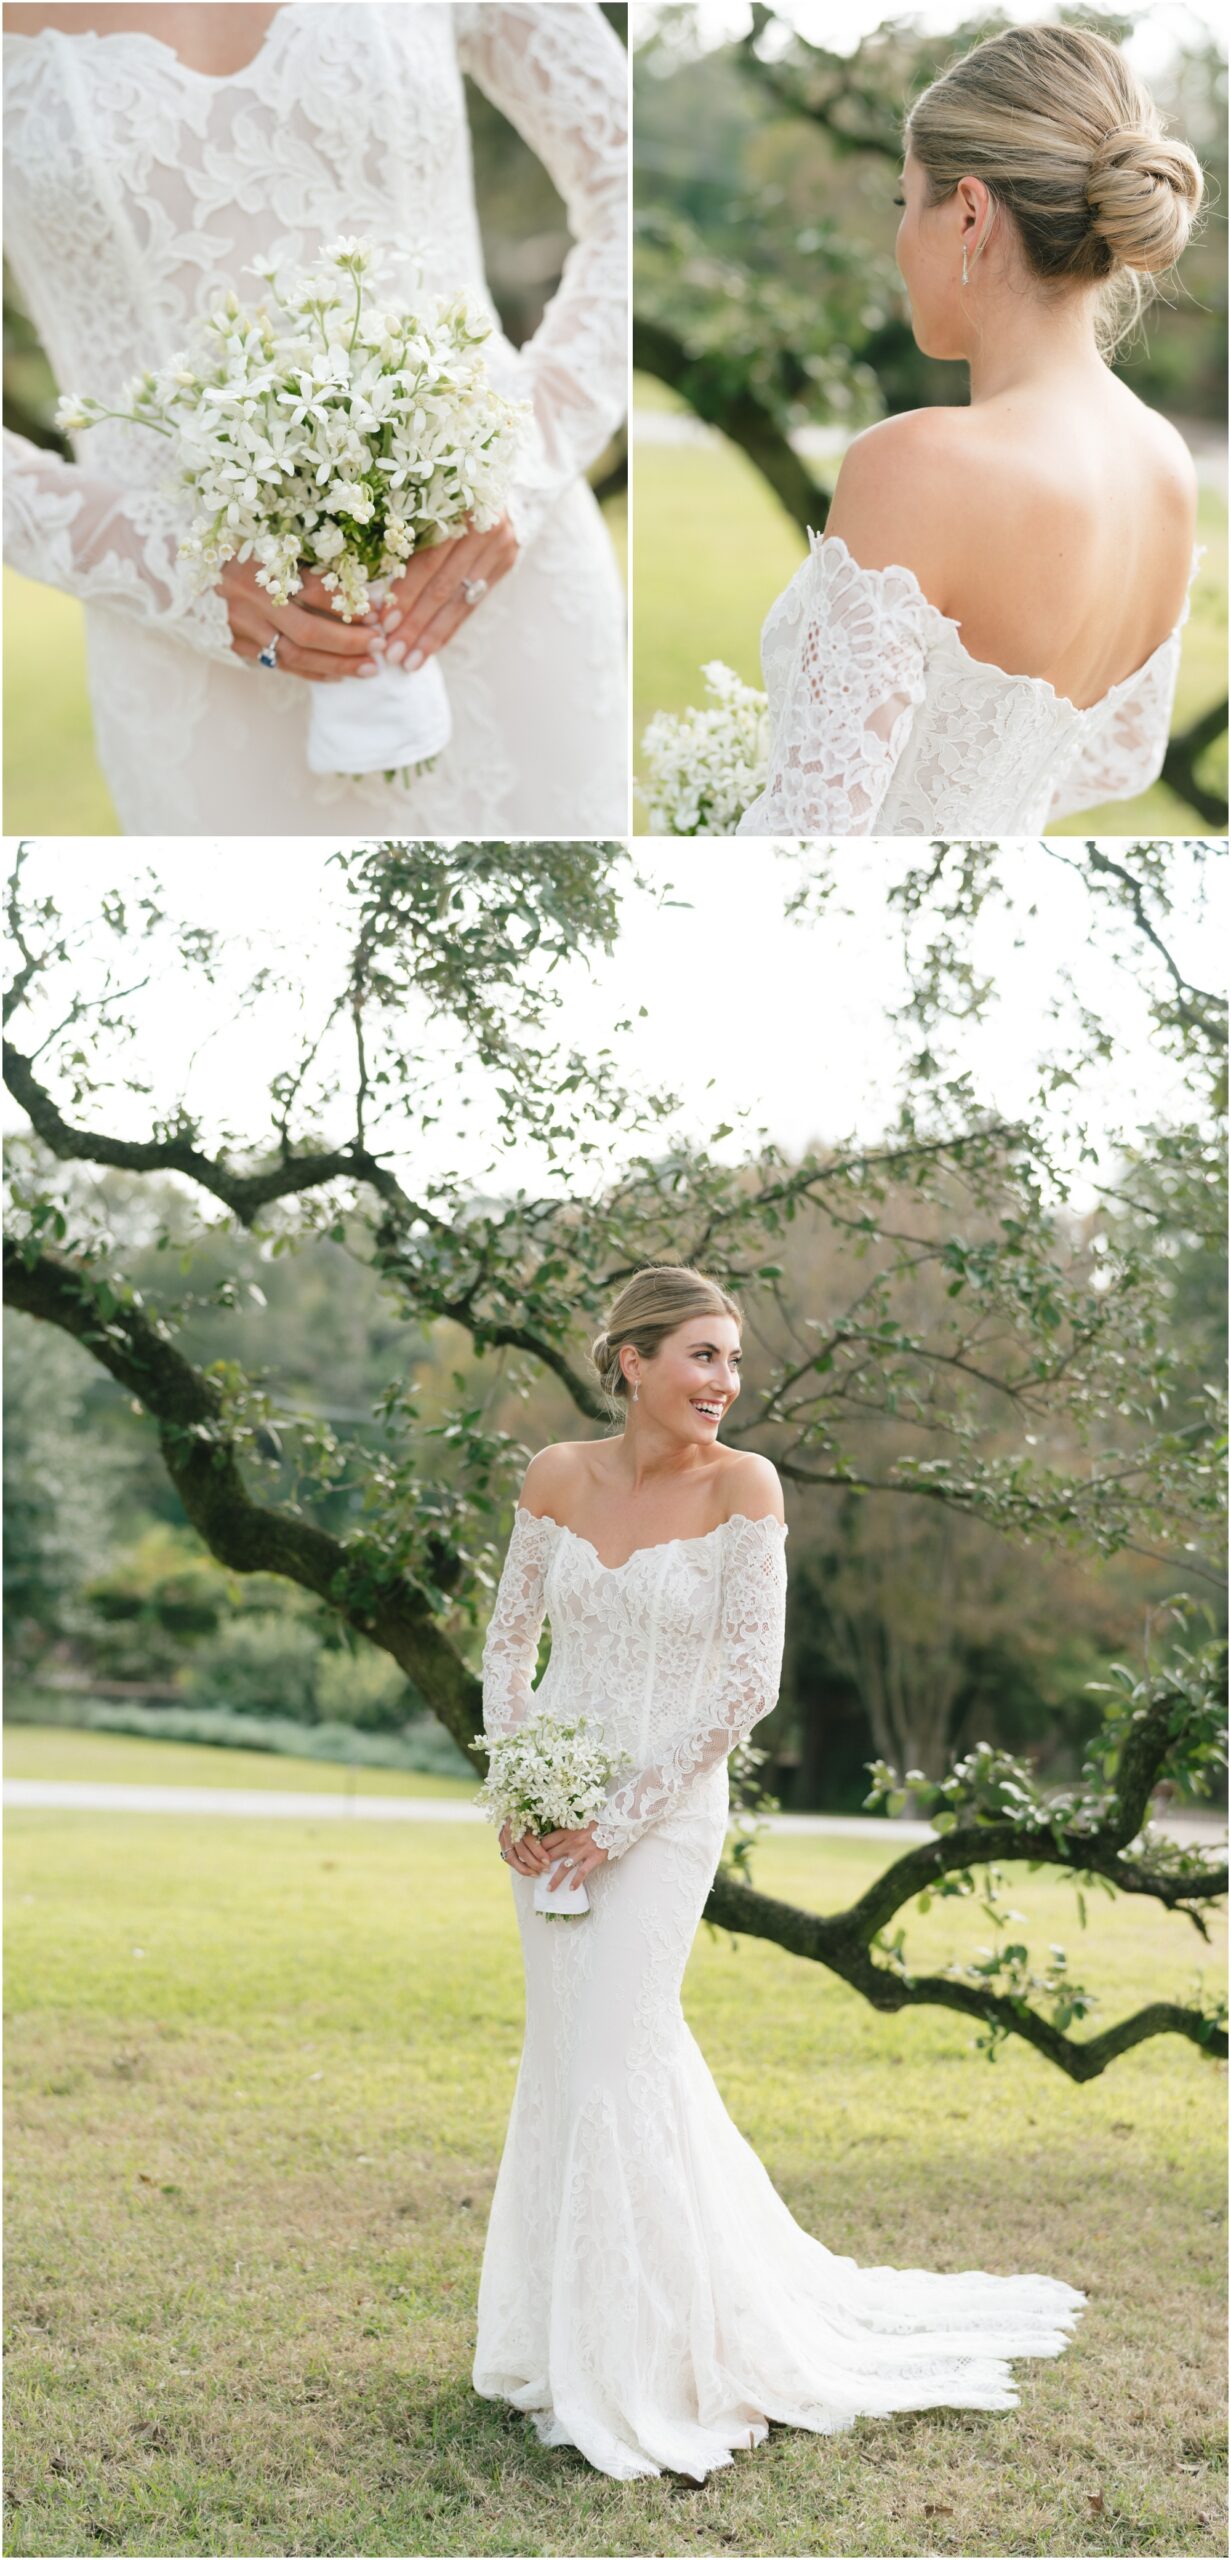 bridal portraits with details at a wedding at commodore perry estate in austin texas